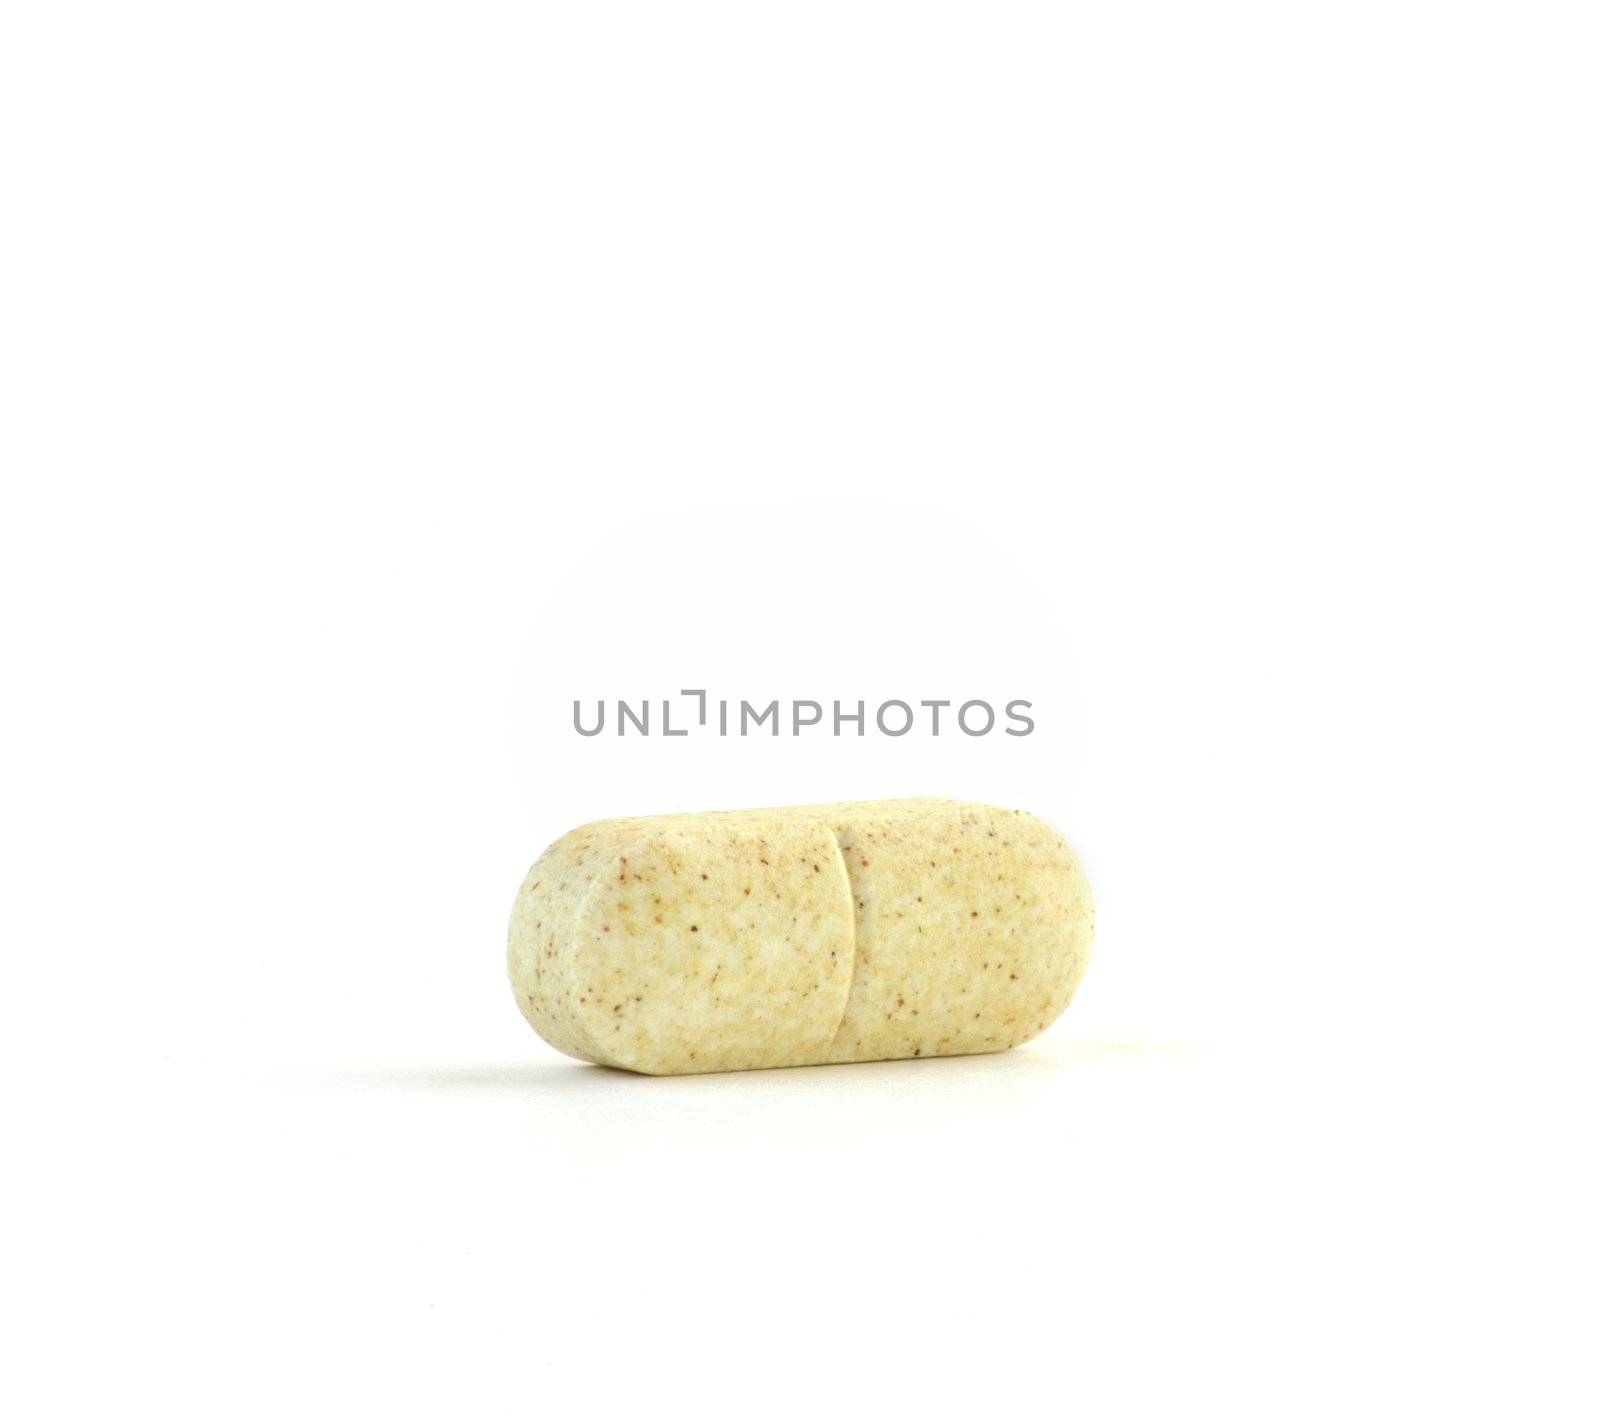 Speckled Vitamin C Tablet Isolated Against a Pure White Background